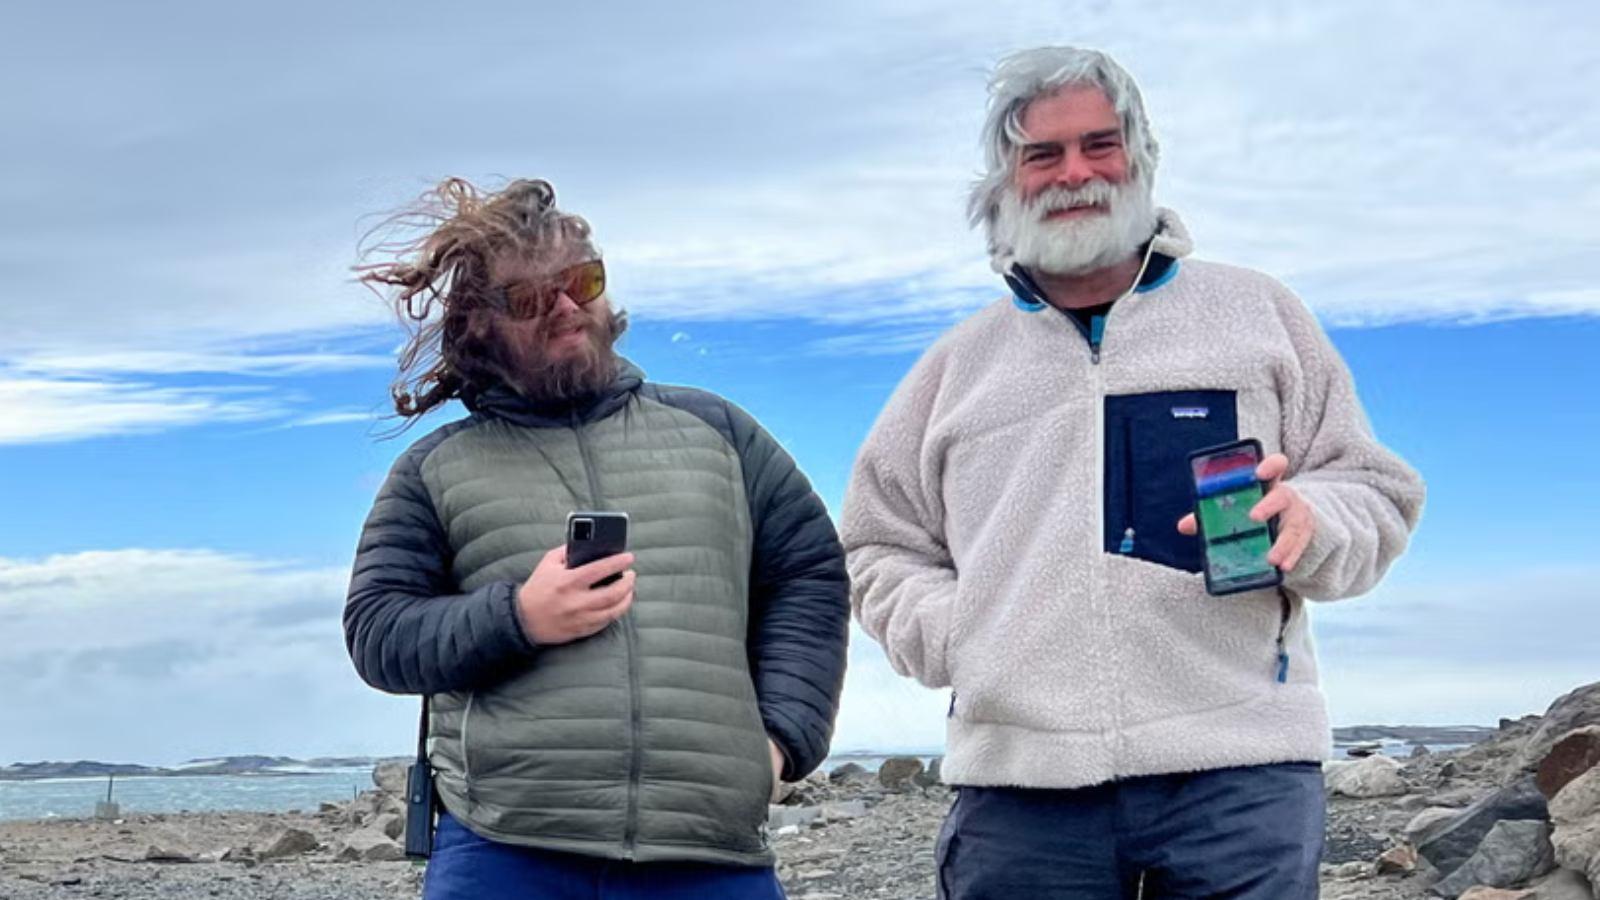 Two scientists stood in Antarctica hold their phones aloft, with Pokemon Go visible on the screens